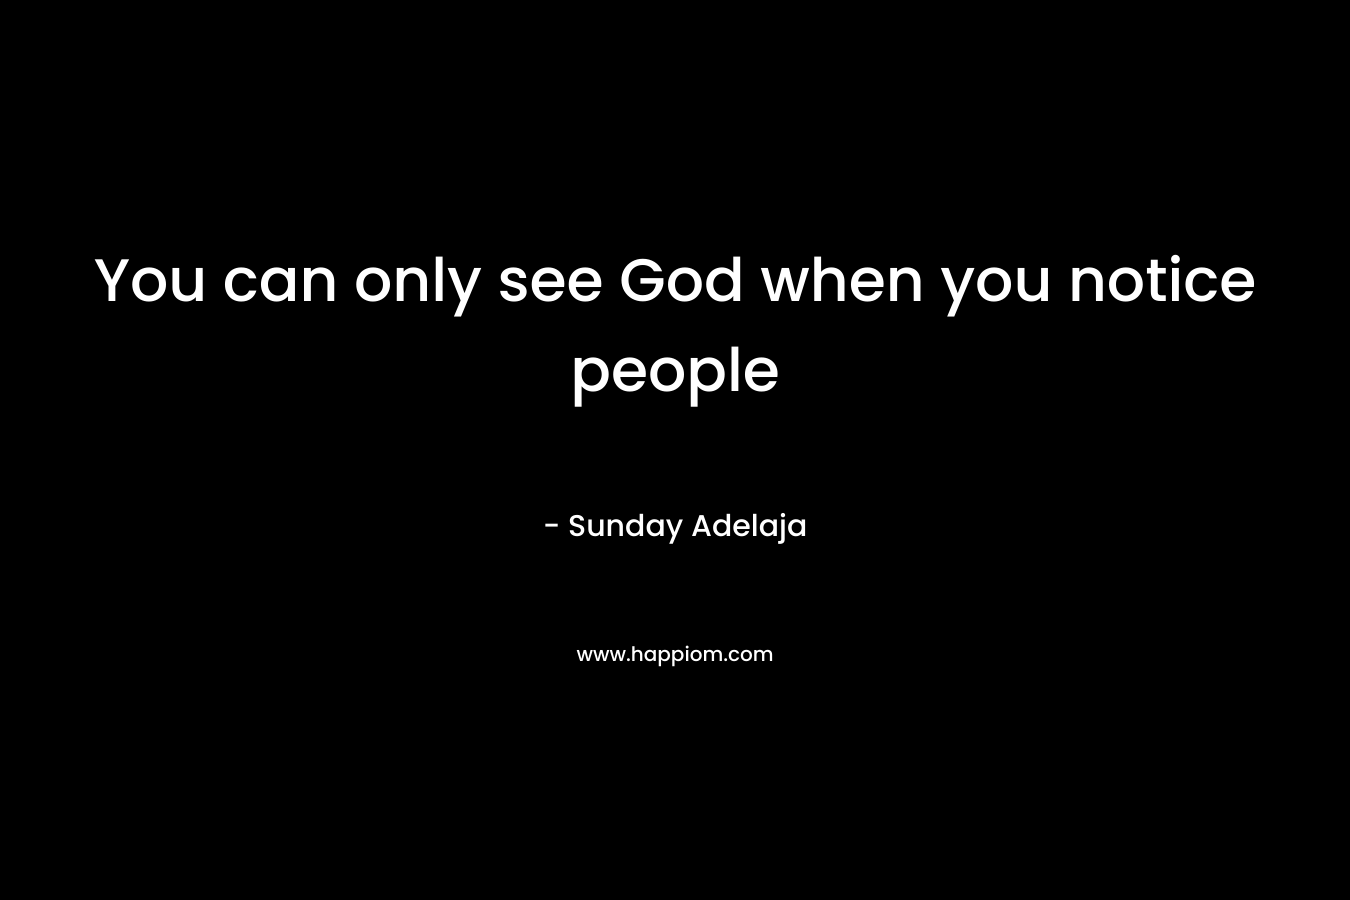 You can only see God when you notice people